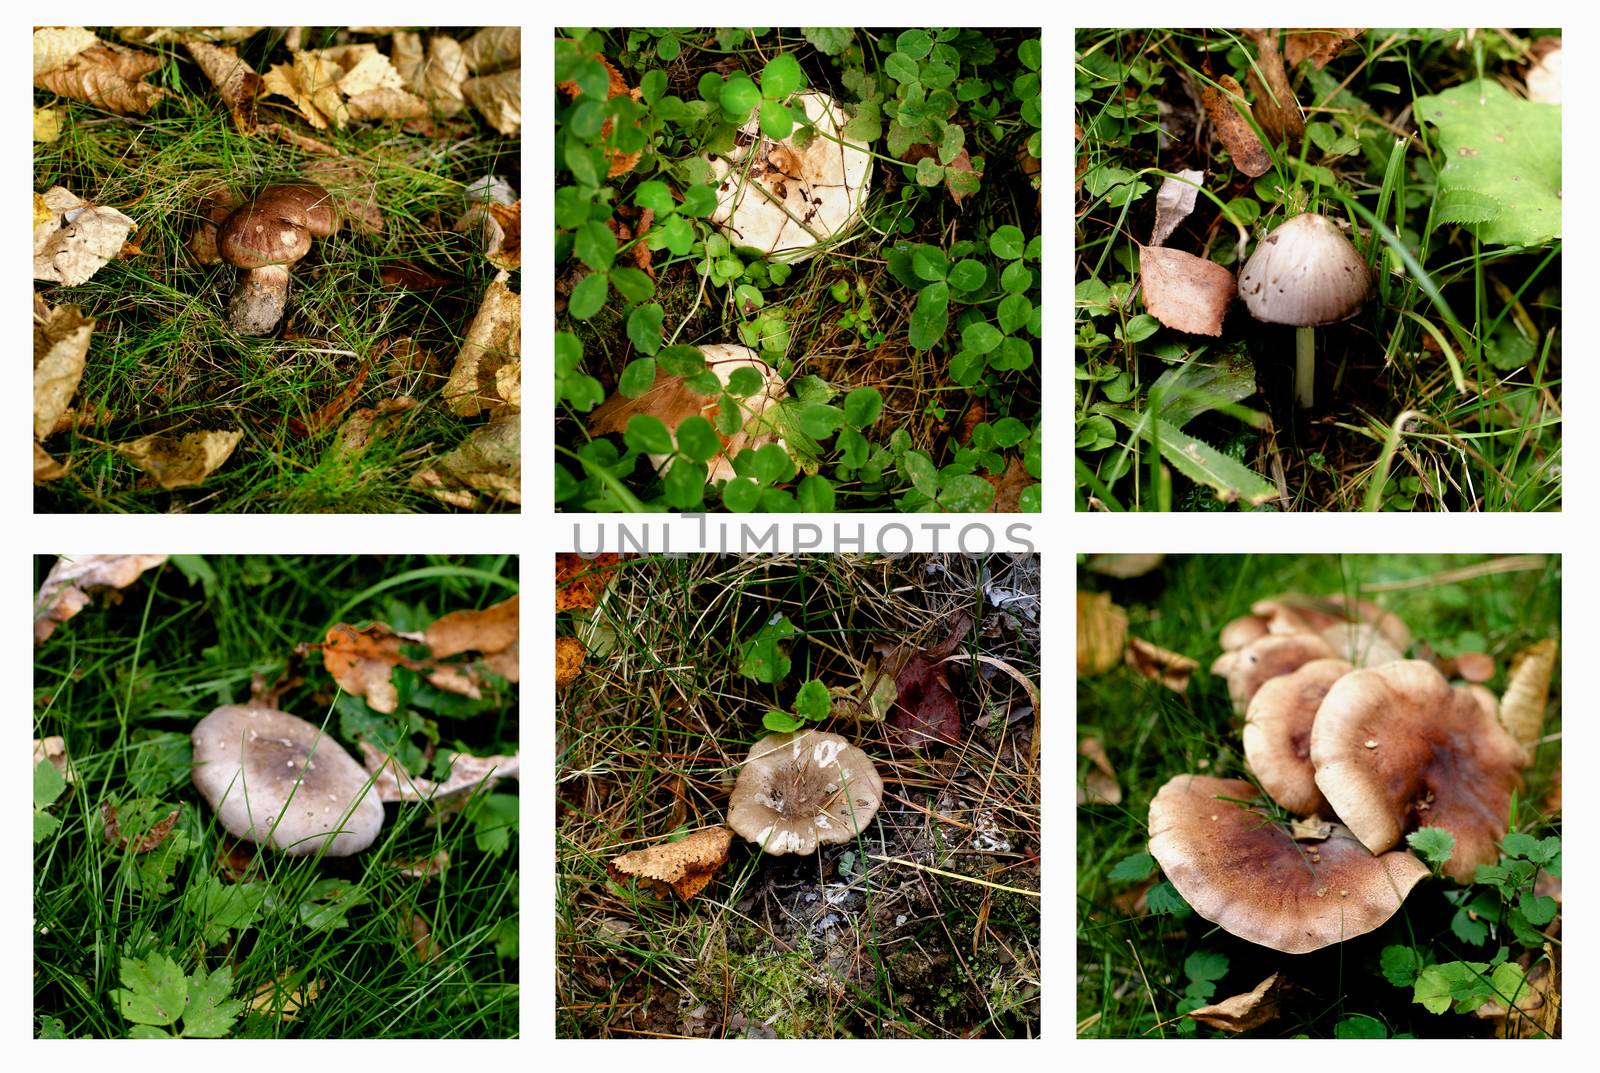 Collection of Various Forest Non-Edible and Conditionally Edible Mushrooms between Green Grass and Dry Leafs Outdoors. Selective Focus